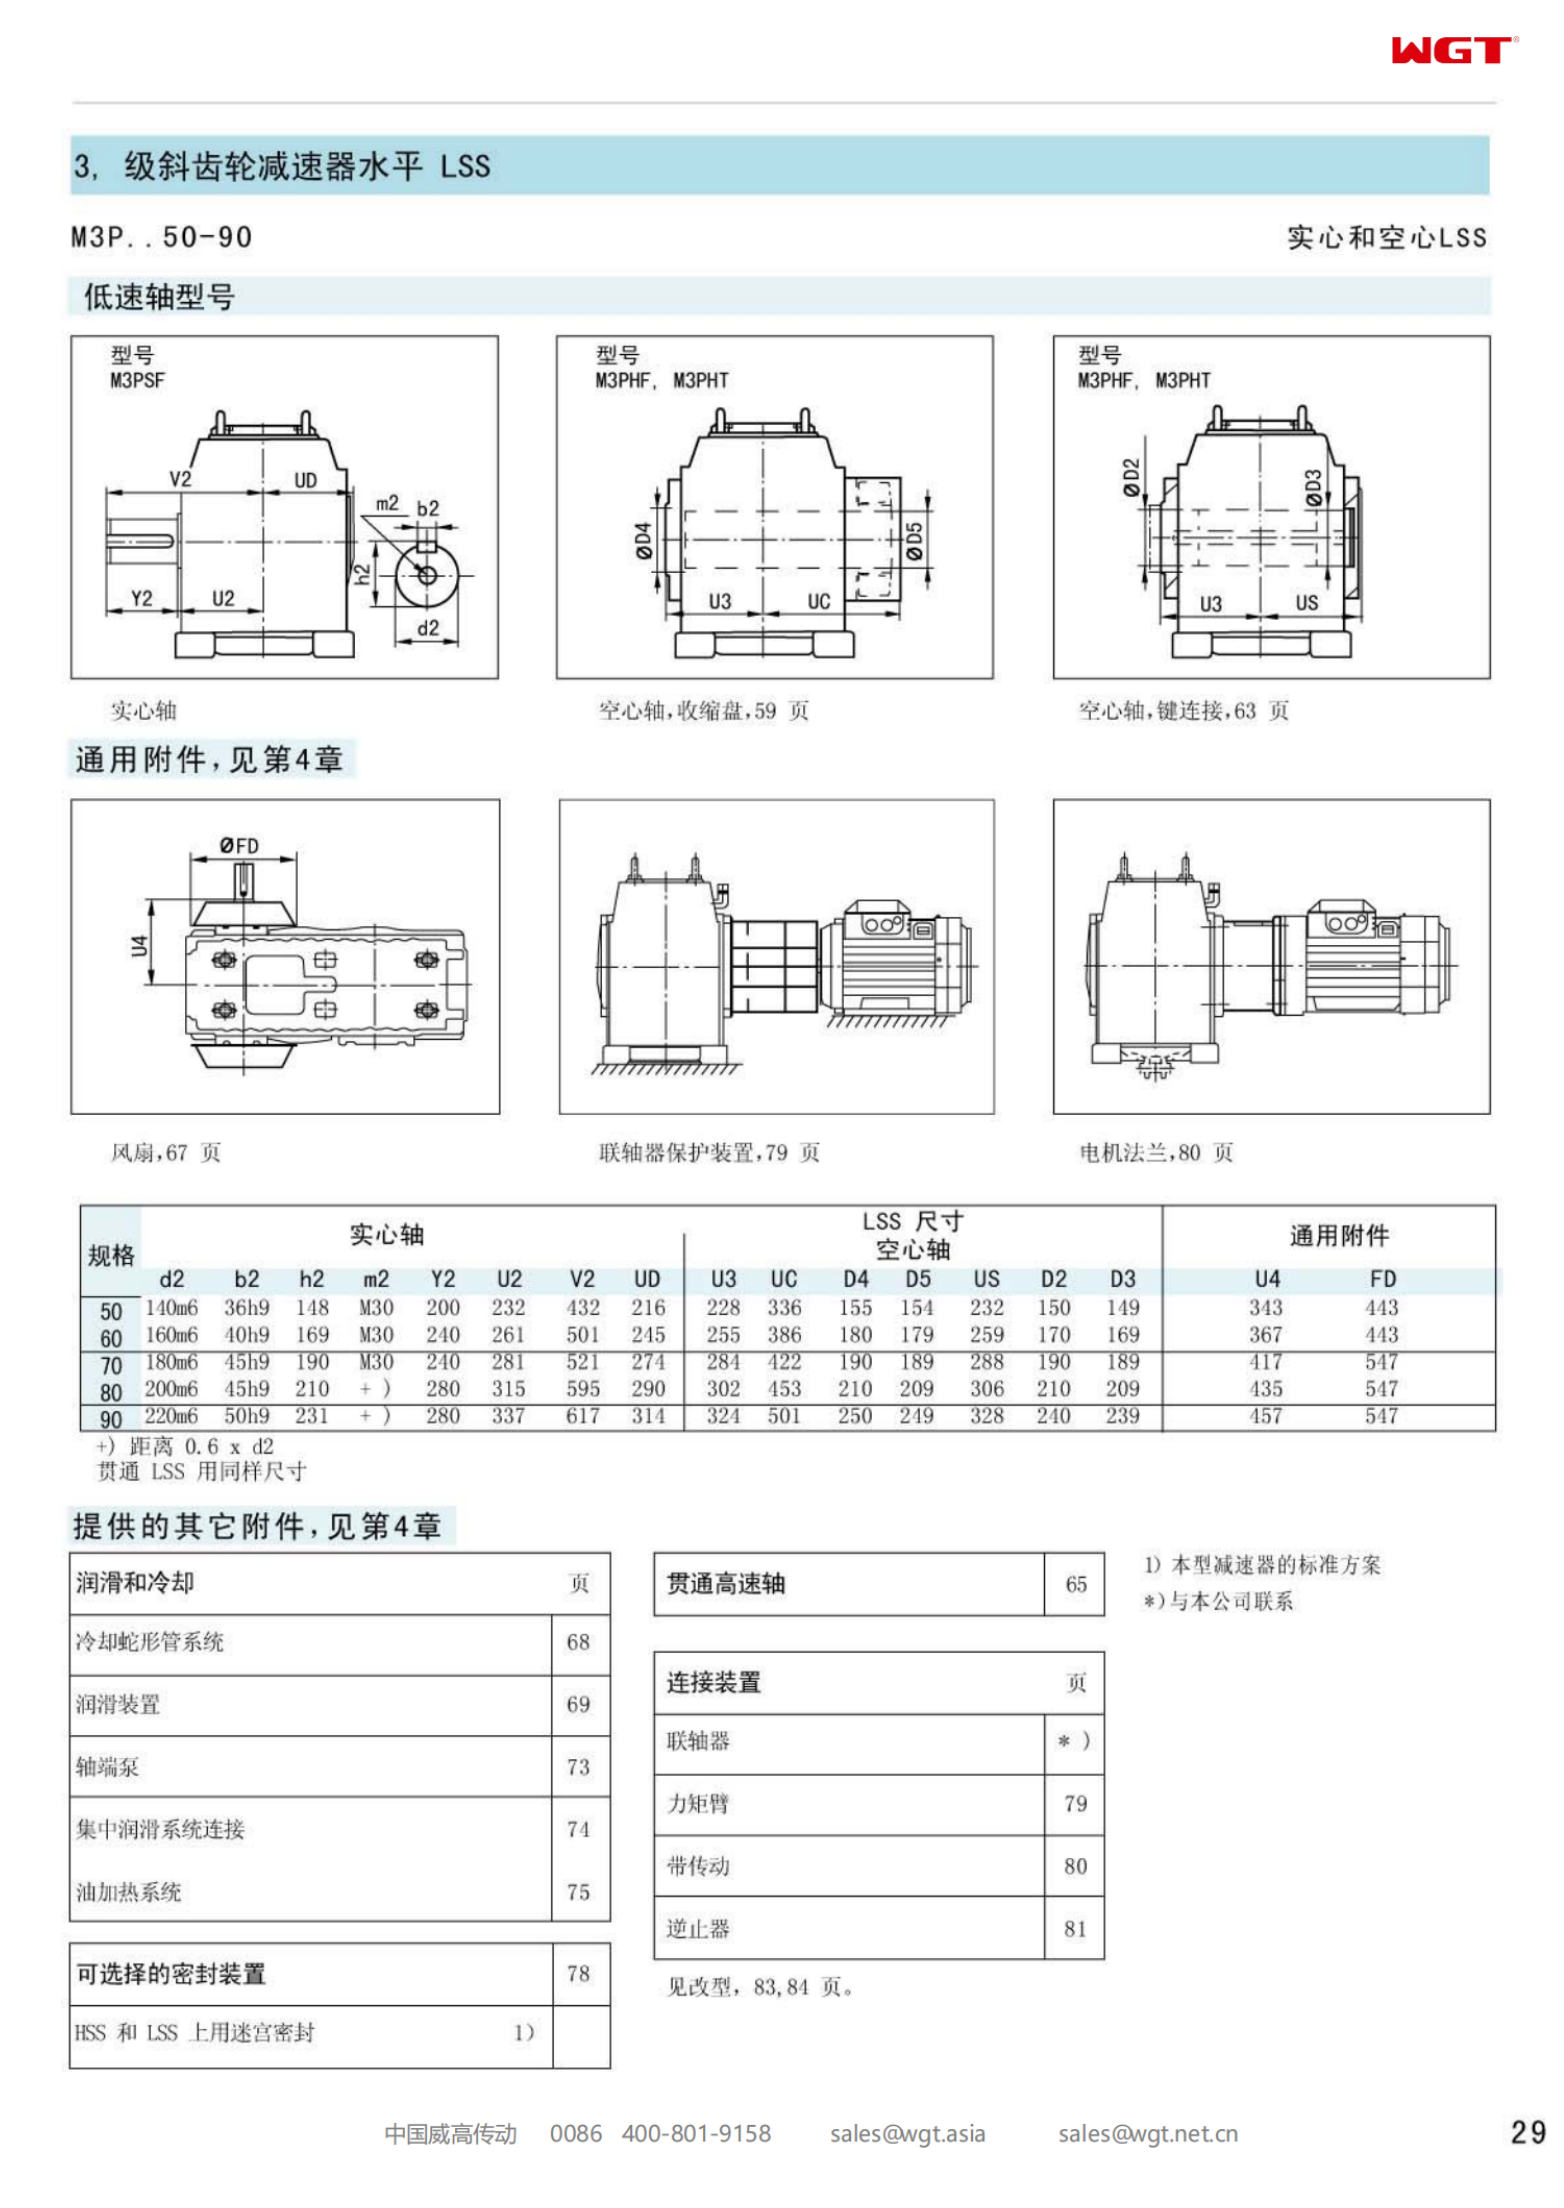 M3PHF60 Replace_SEW_M_Series Gearbox